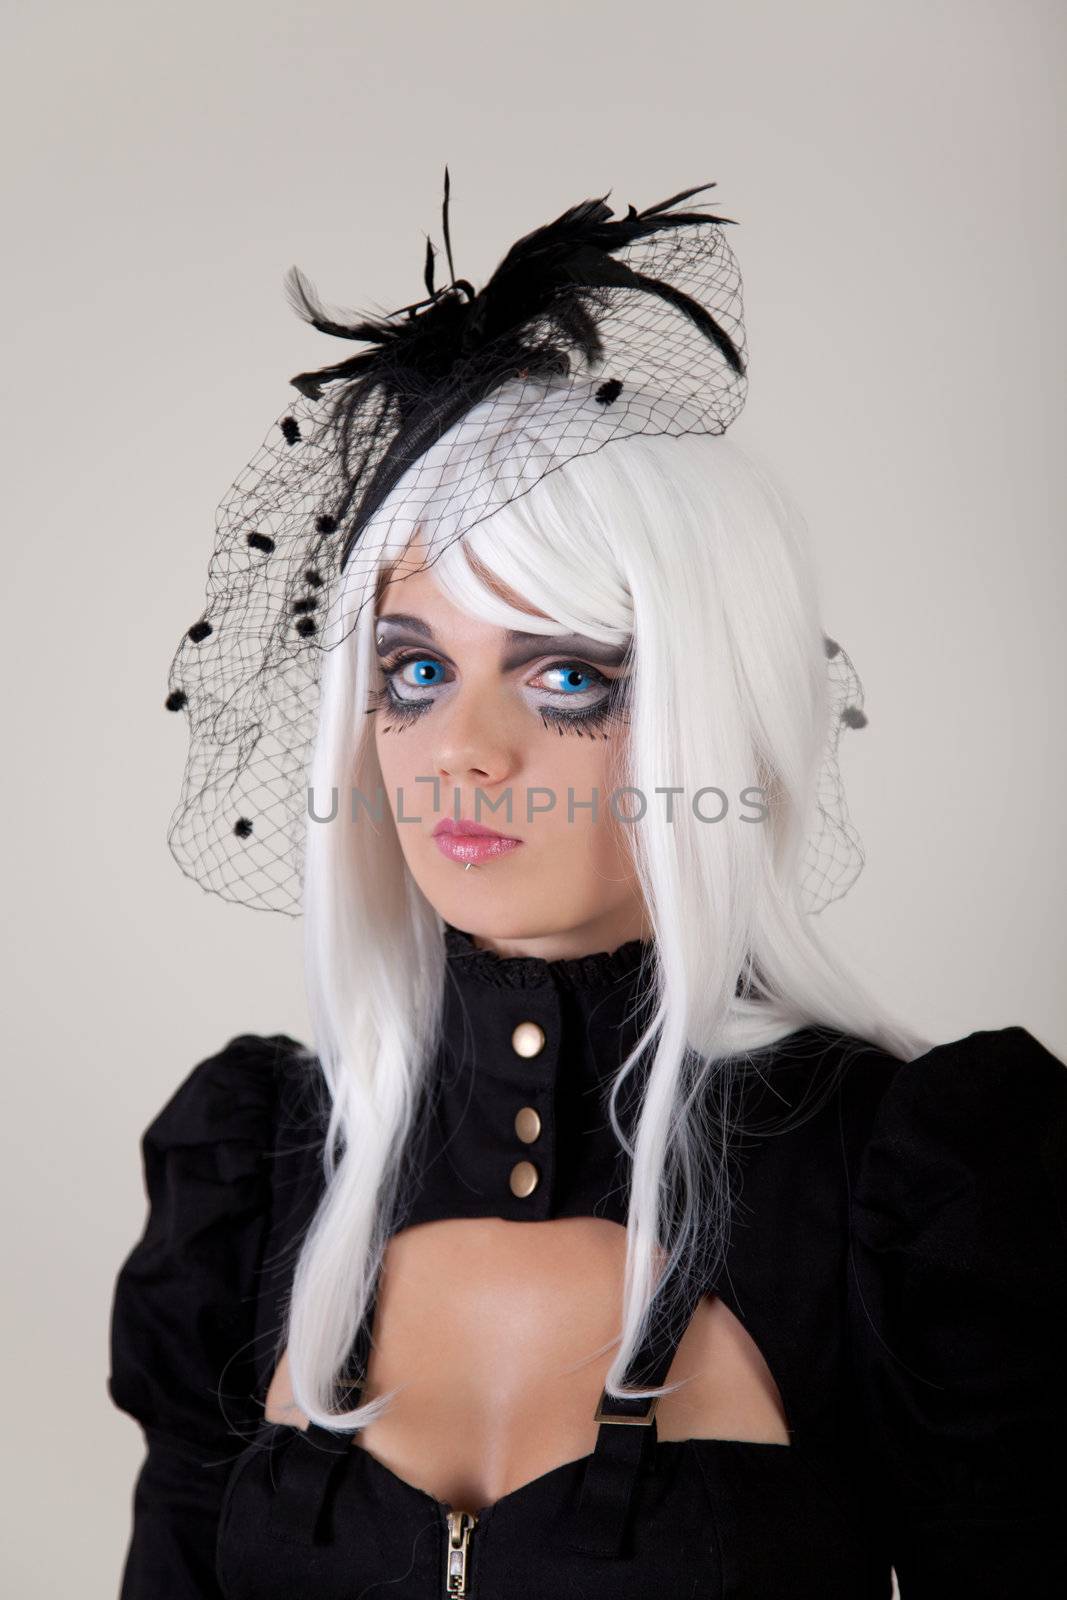 Fantasy girl with creative make-up and blue contact lenses, studio shot 